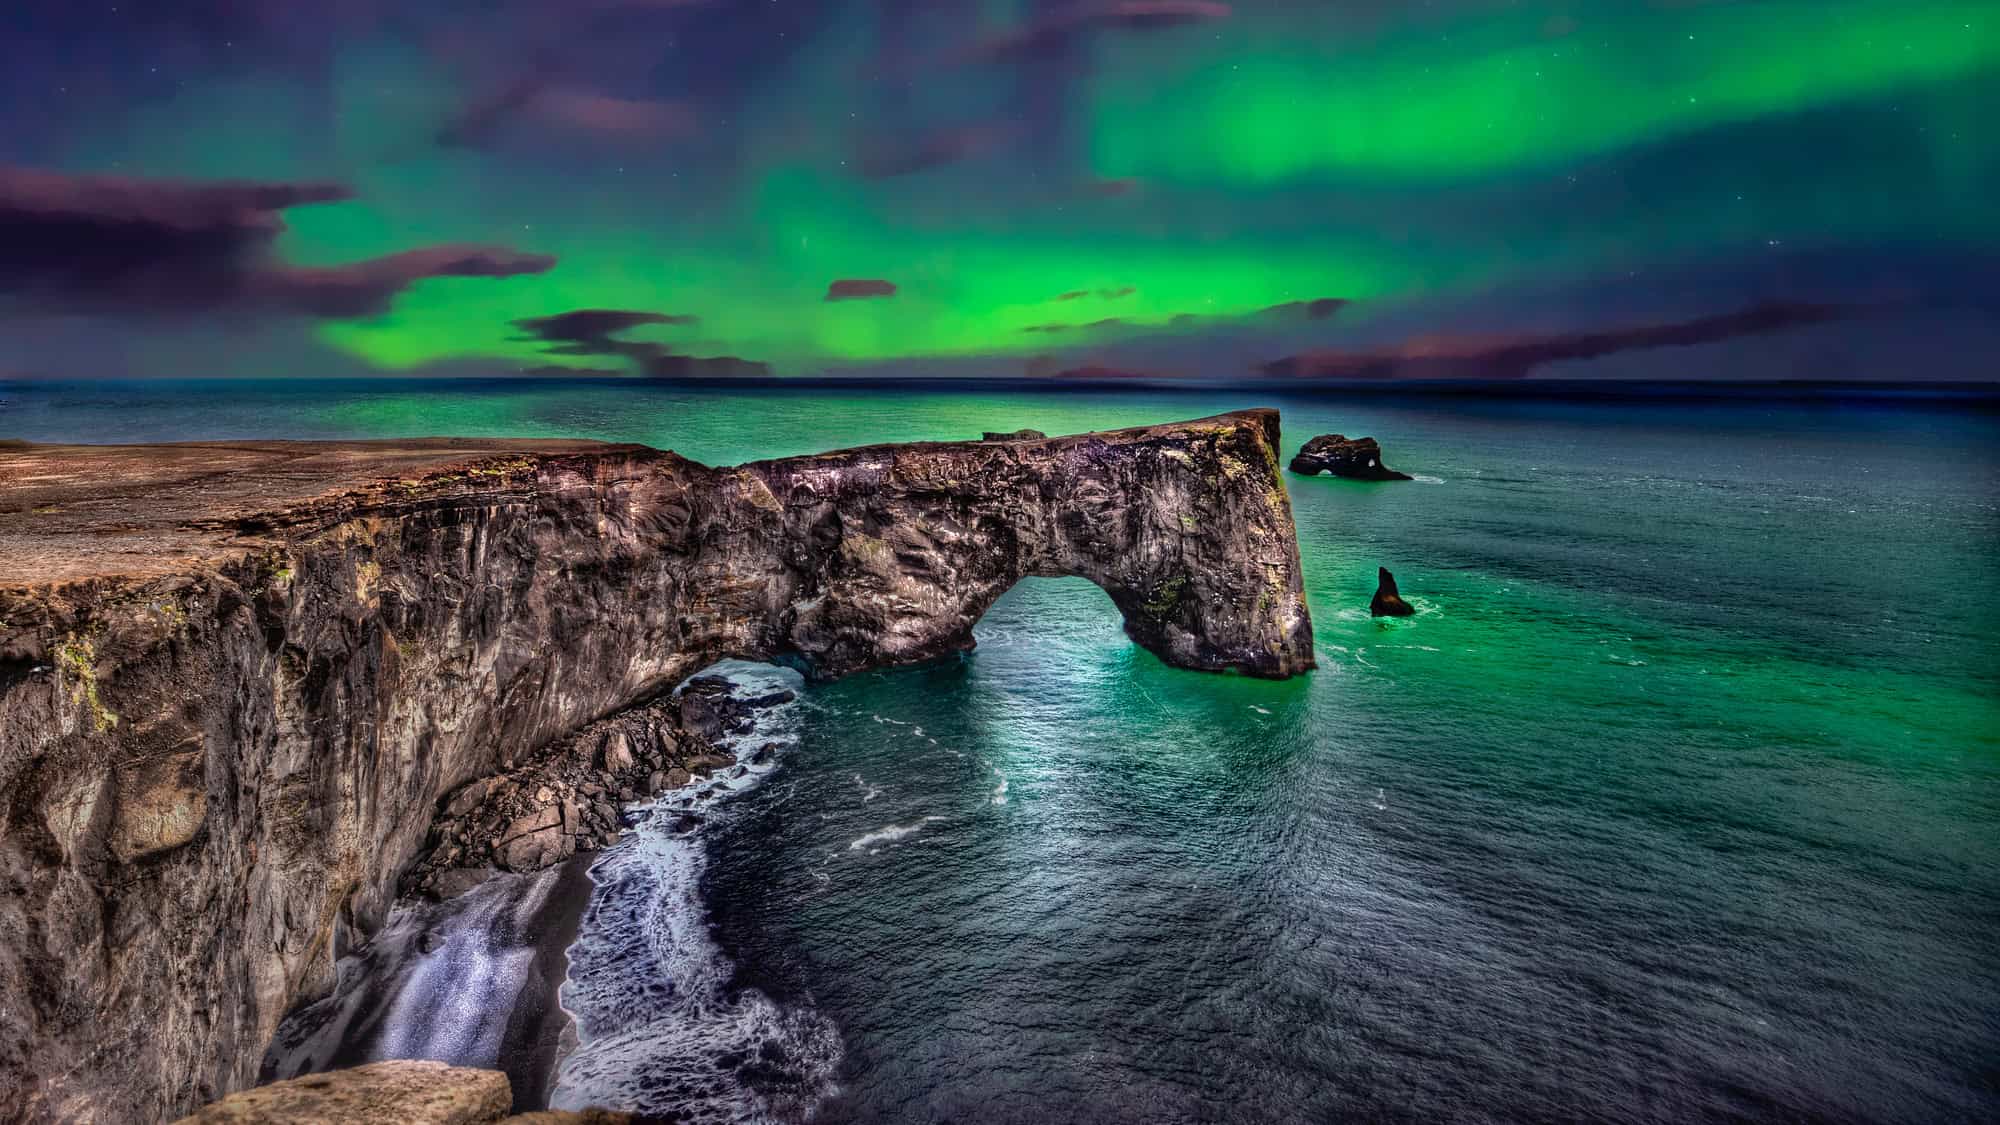 <p>Let’s chat about the Dyrhólaey Arch, <strong>a colossal natural arch lounging on Iceland’s southern coast</strong>. Not only does it serve up jaw-dropping views of those Insta-famous black sand beaches and the Atlantic doing its thing, but the arch itself is like a catwalk model. </p> <p>And as if that wasn’t enough, it’s practically a puffin paradise! Those little guys are just hanging out, acting like they’re on holiday. It’s a photographic jackpot that will have your camera begging for a break.</p> <div class="wp-block-kadence-iconlist kt-svg-icon-list-items kt-svg-icon-list-items4232_3c3842-3b kt-svg-icon-list-columns-1 alignnone"> <ul class="kt-svg-icon-list"> <li class="wp-block-kadence-listitem kt-svg-icon-list-item-wrap kt-svg-icon-list-item-4232_13da4a-8f"><span><strong>Best time to visit</strong>: Midday to late afternoon for the best light and puffin sightings.</span></li> </ul> </div>